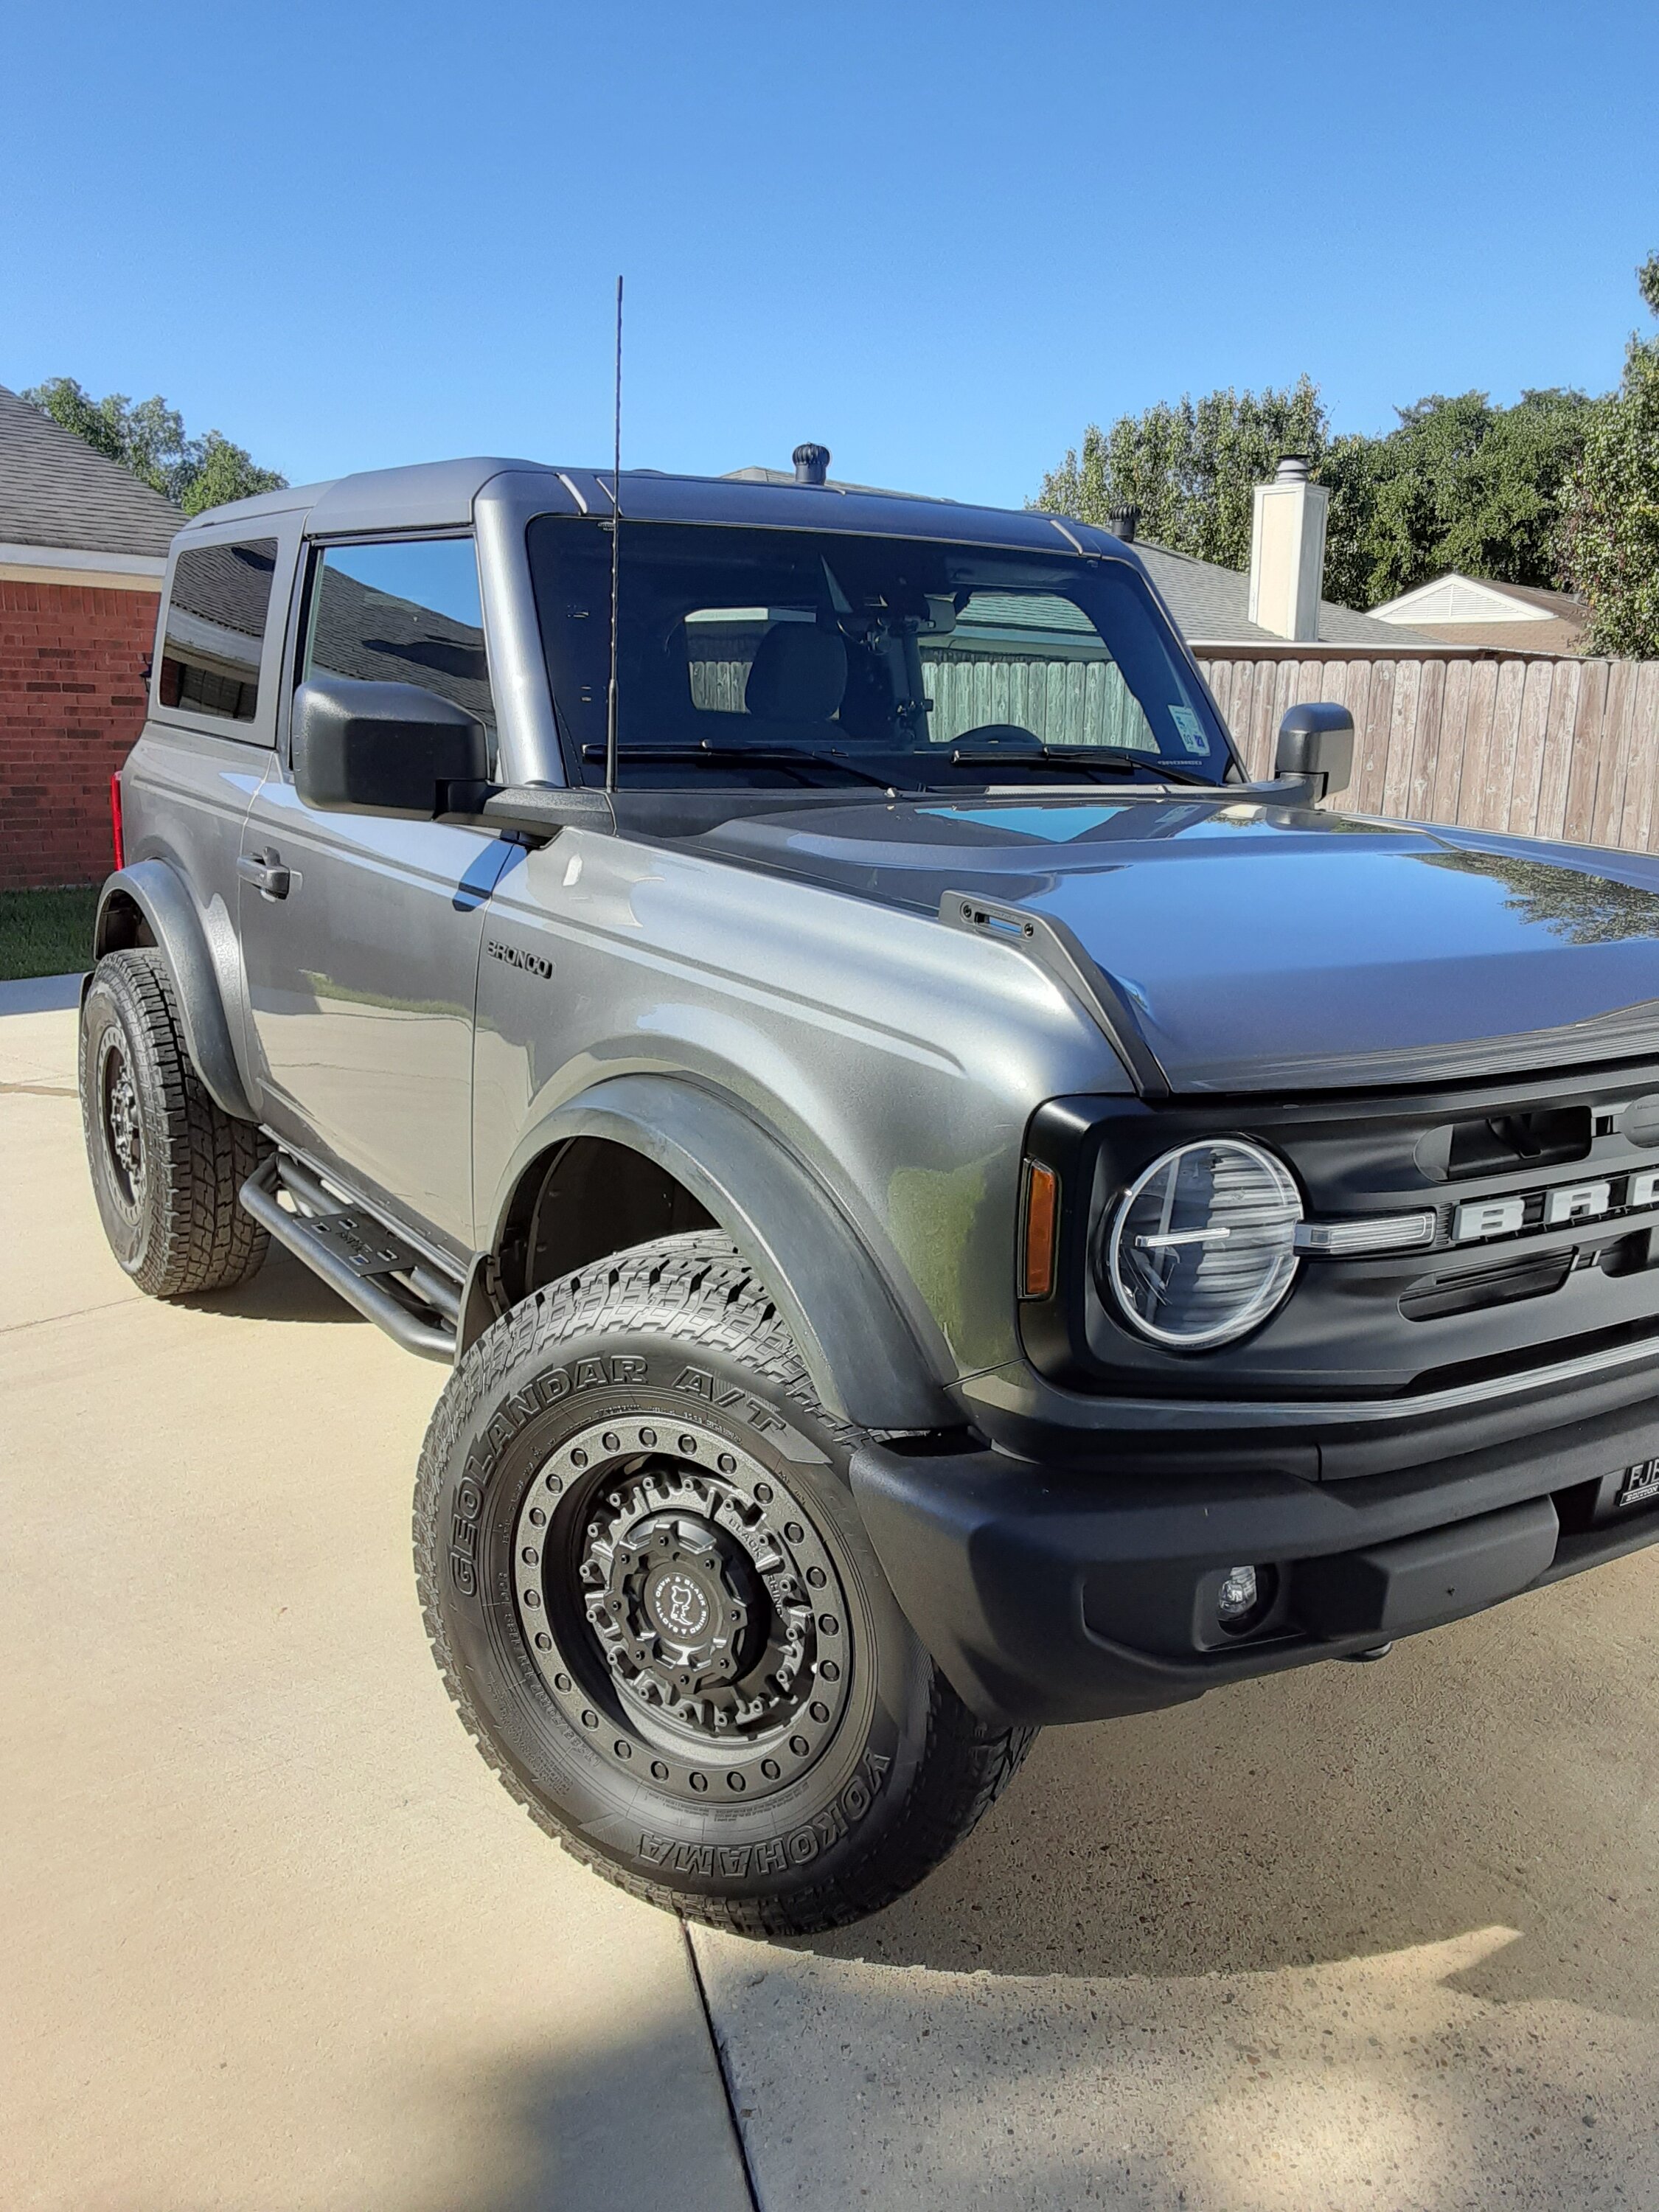 Ford Bronco Drop a Picture of Your Bronco for a Rating 1673791136995